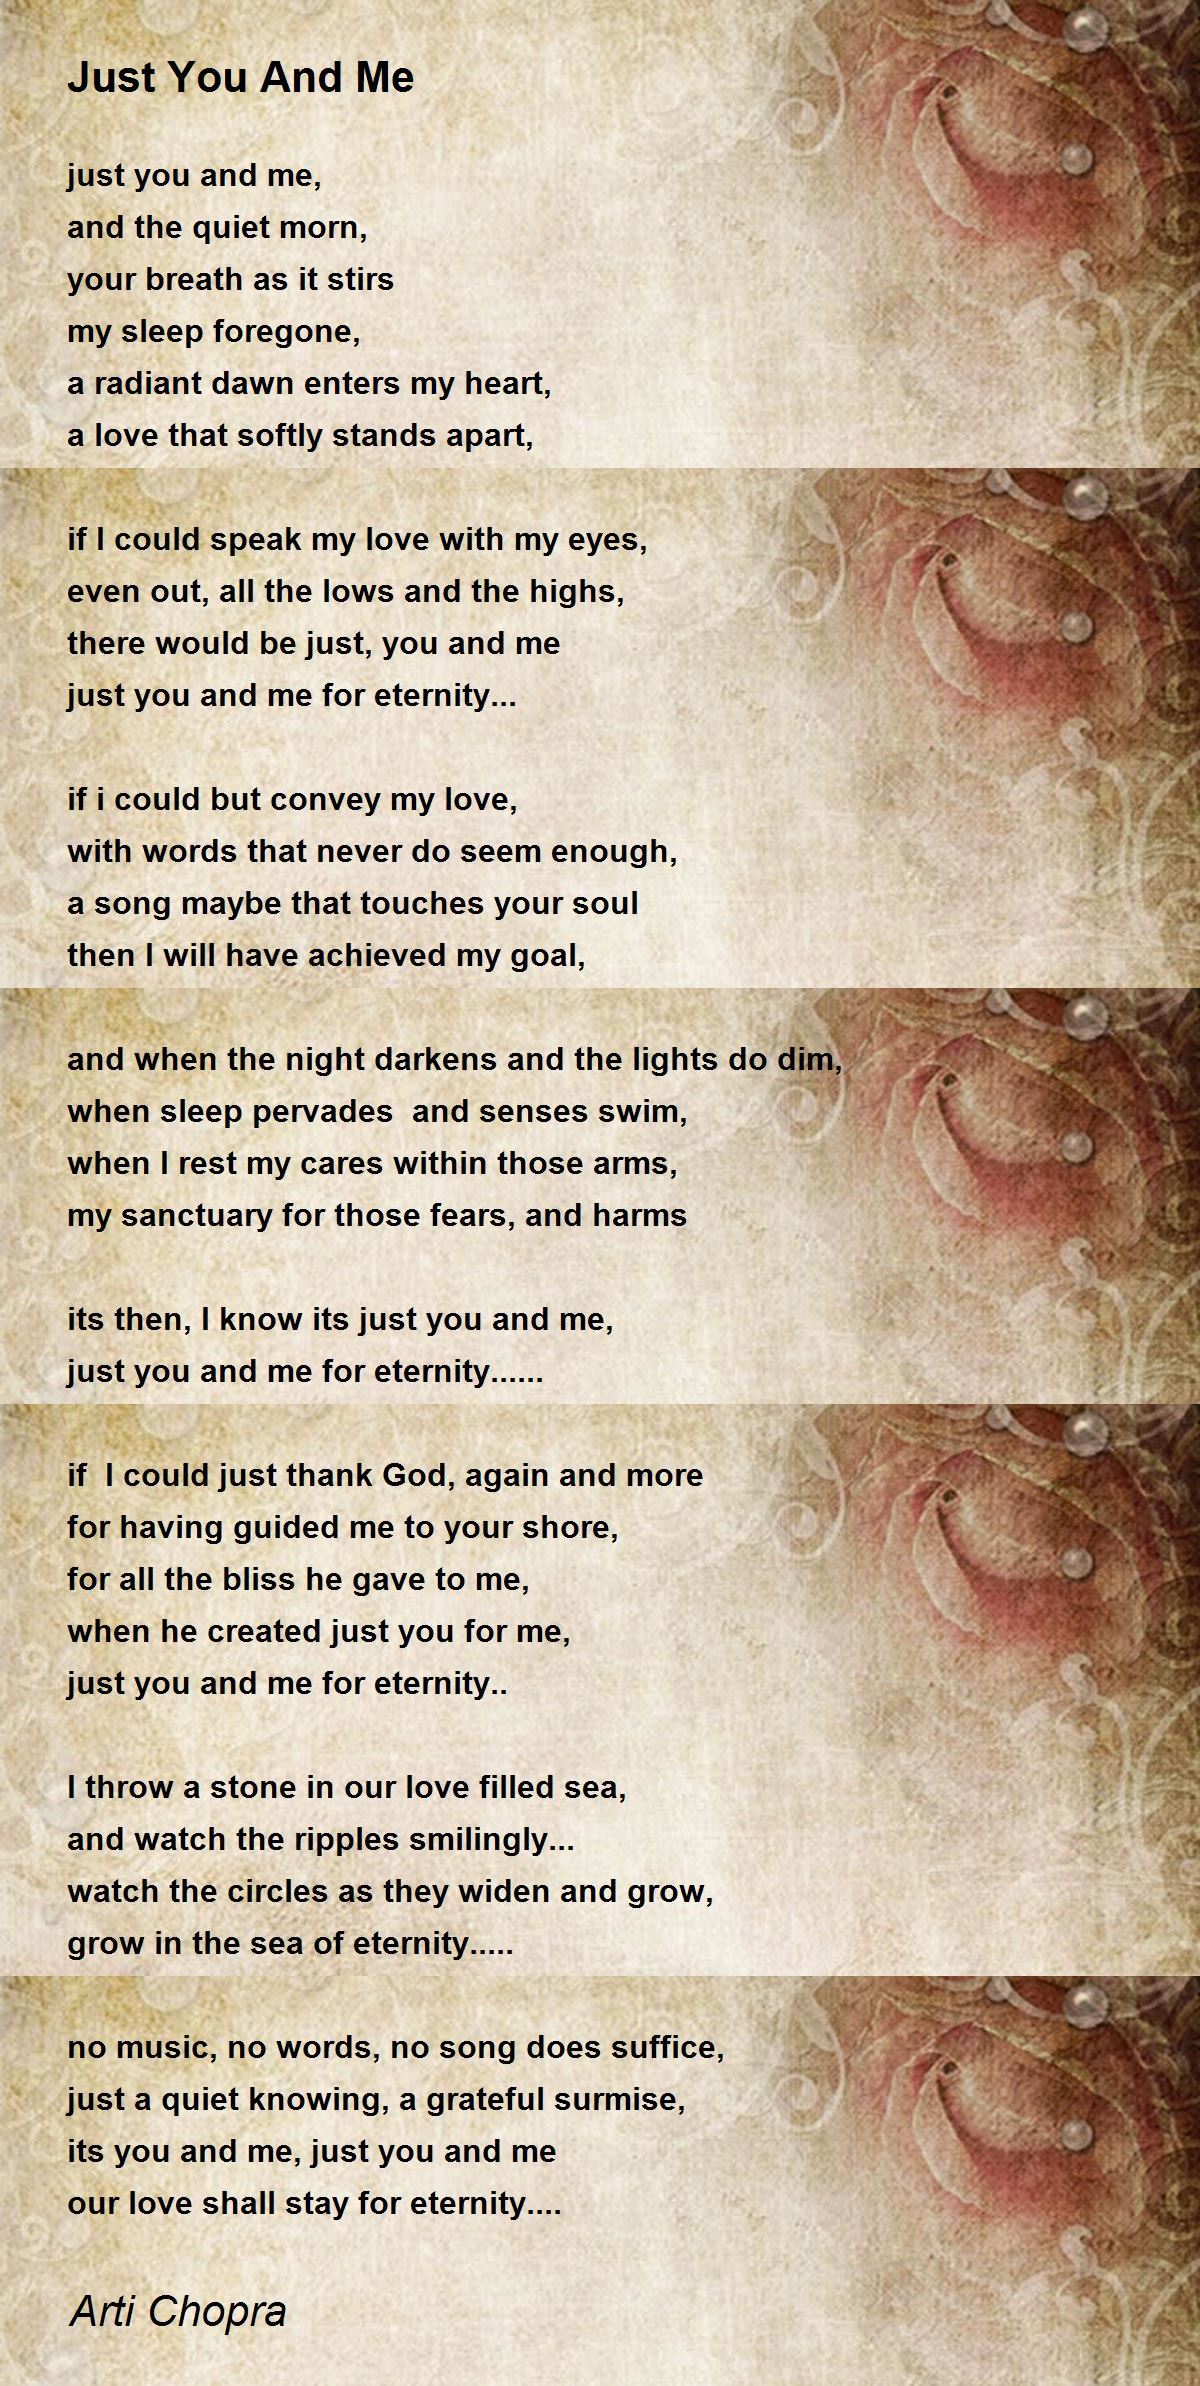 Just You And Me Poem by Arti Chopra - Poem Hunter